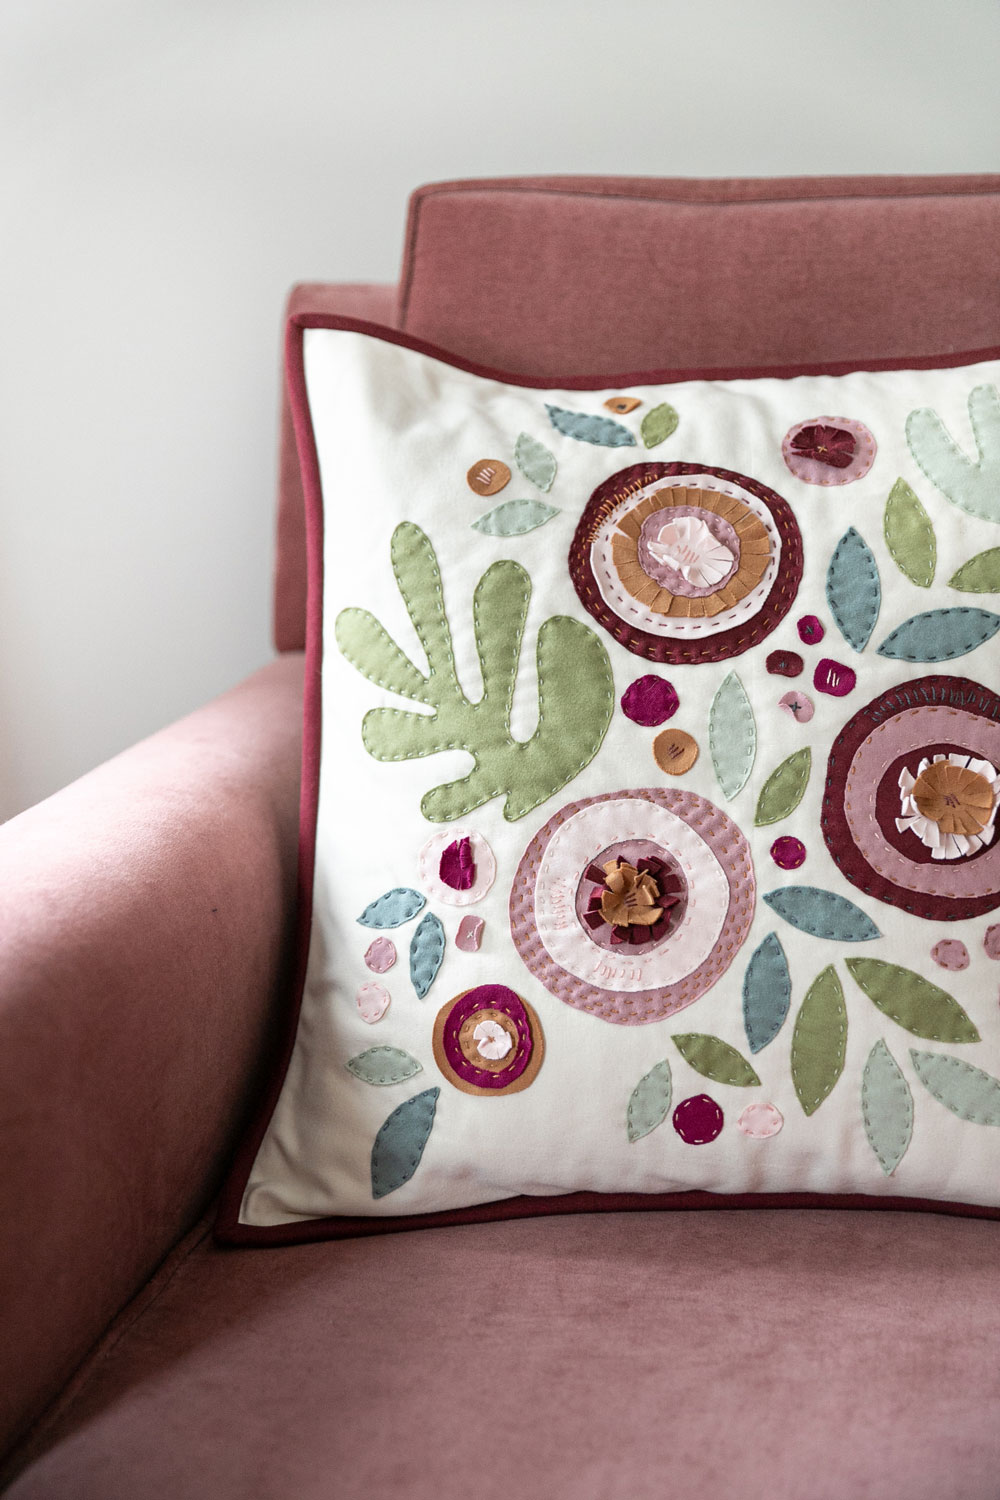 Make a modern appliqué pillow with knits! By using templates from the Bohemian Garden quilt pattern, you can create a buttery soft handmade pillow. suzyquilts.com #quiltedpillow